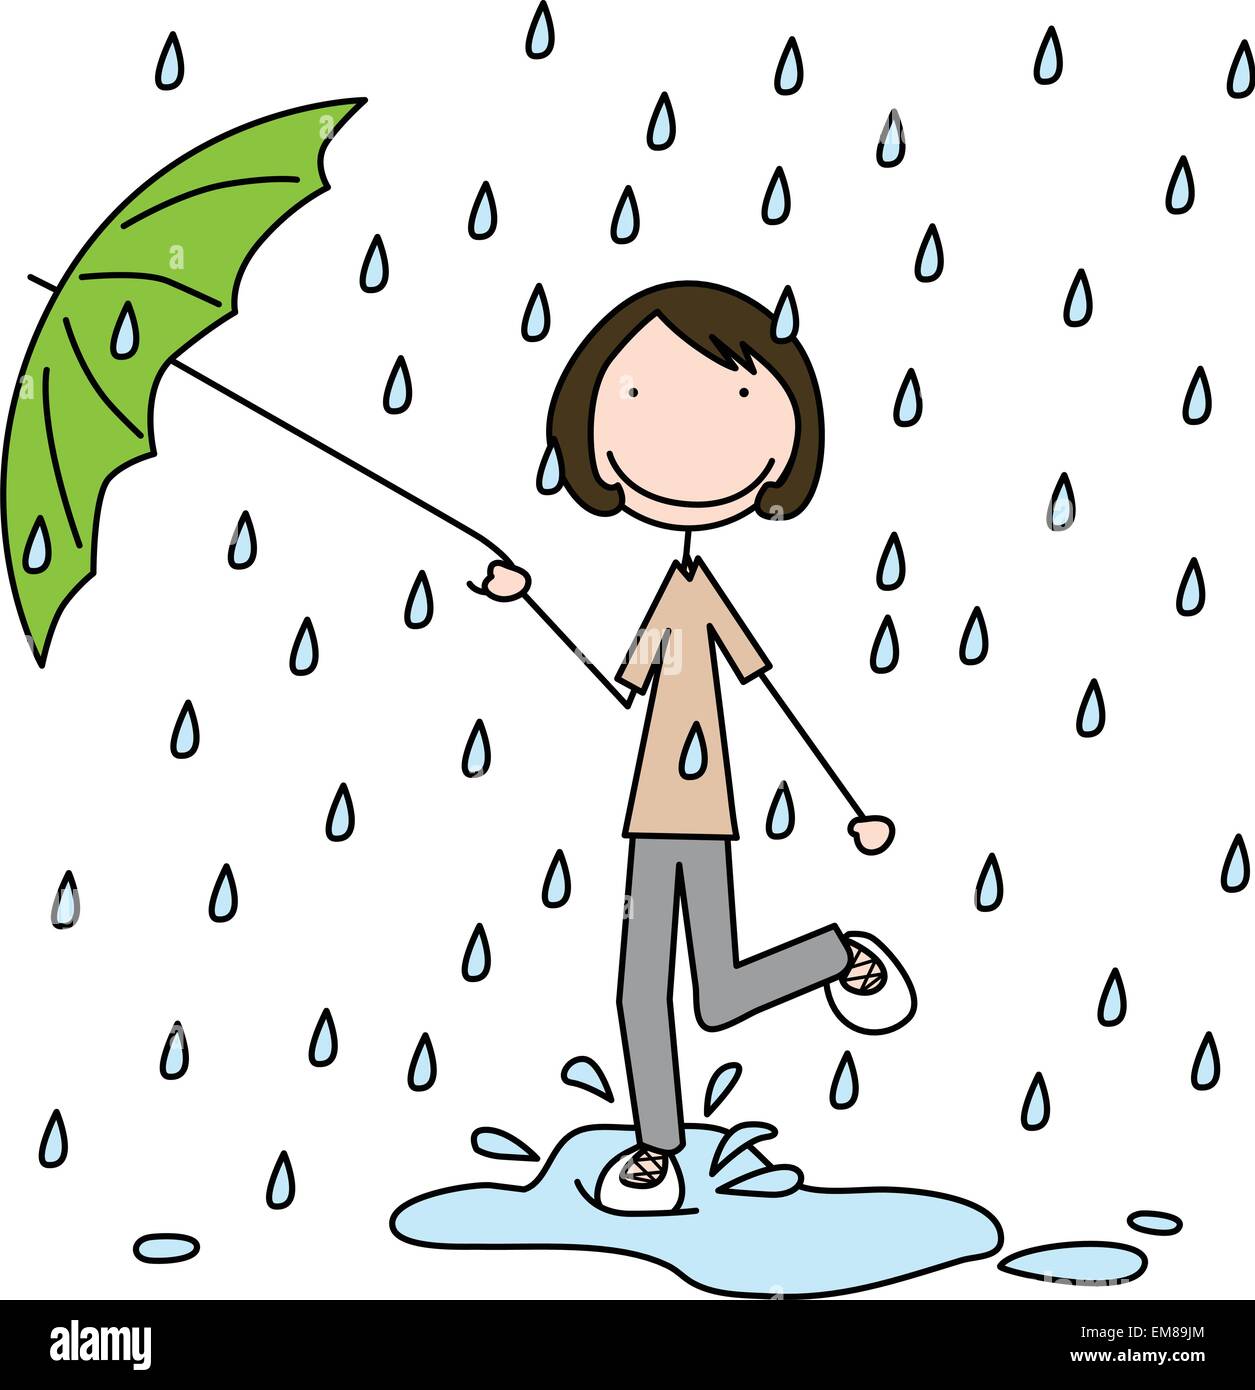 Child puddle jumping Stock Vector Images - Alamy